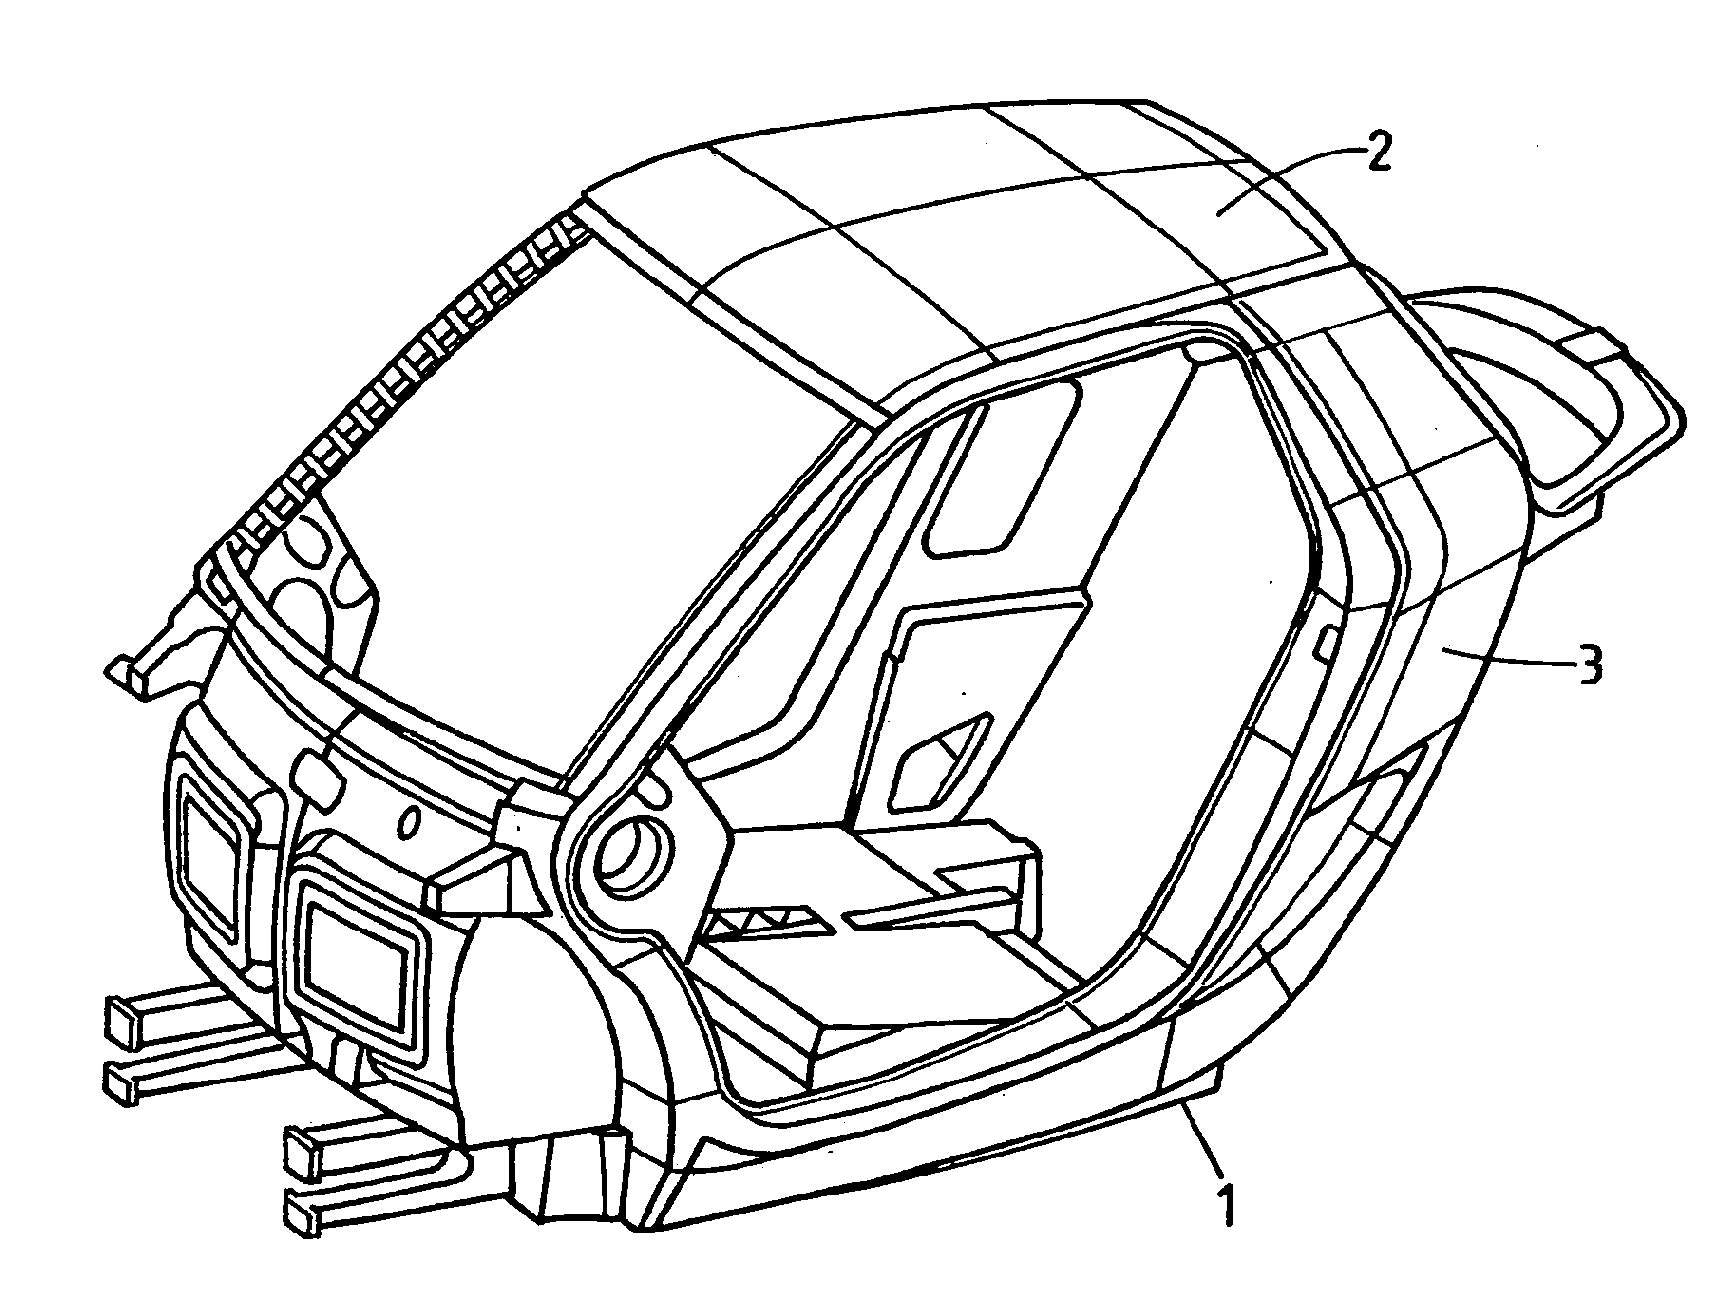 Motor vehicle body for light weight construction